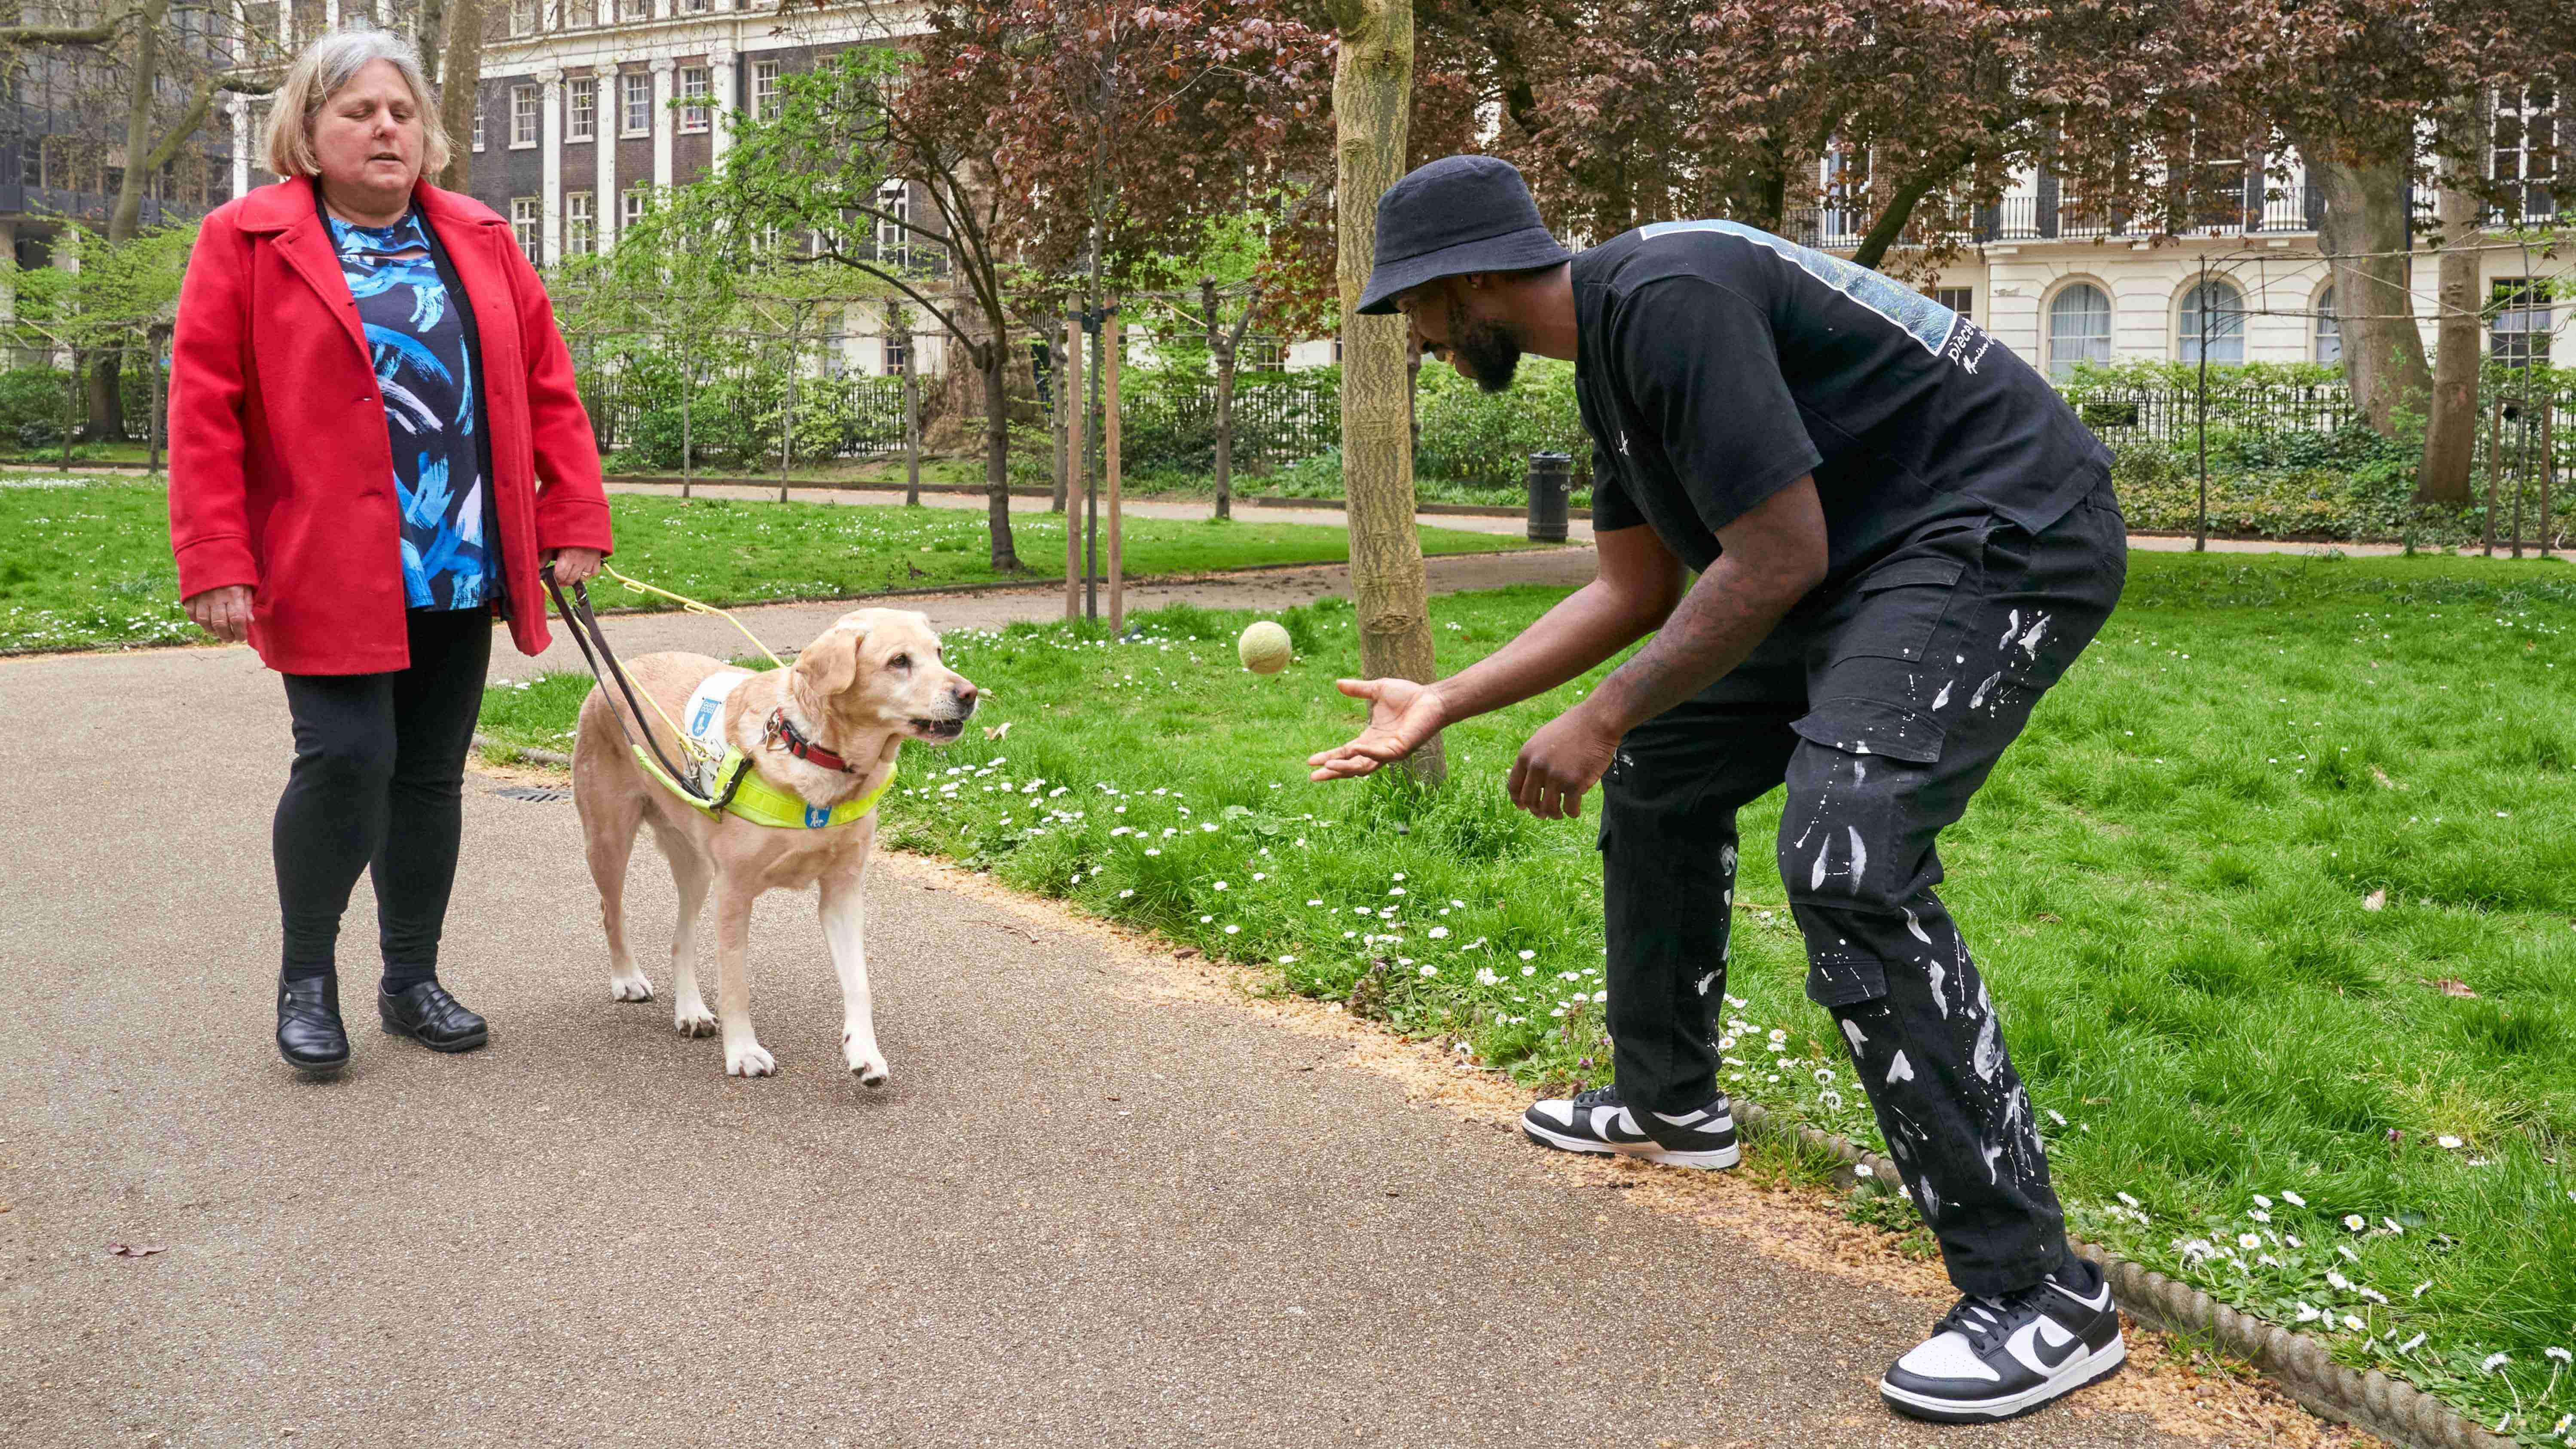 A yellow Labrador guide dog walks with her owner in a London park. The dog is distracted by man throwing a tennis ball up in the air and looking at the dog smiling.  